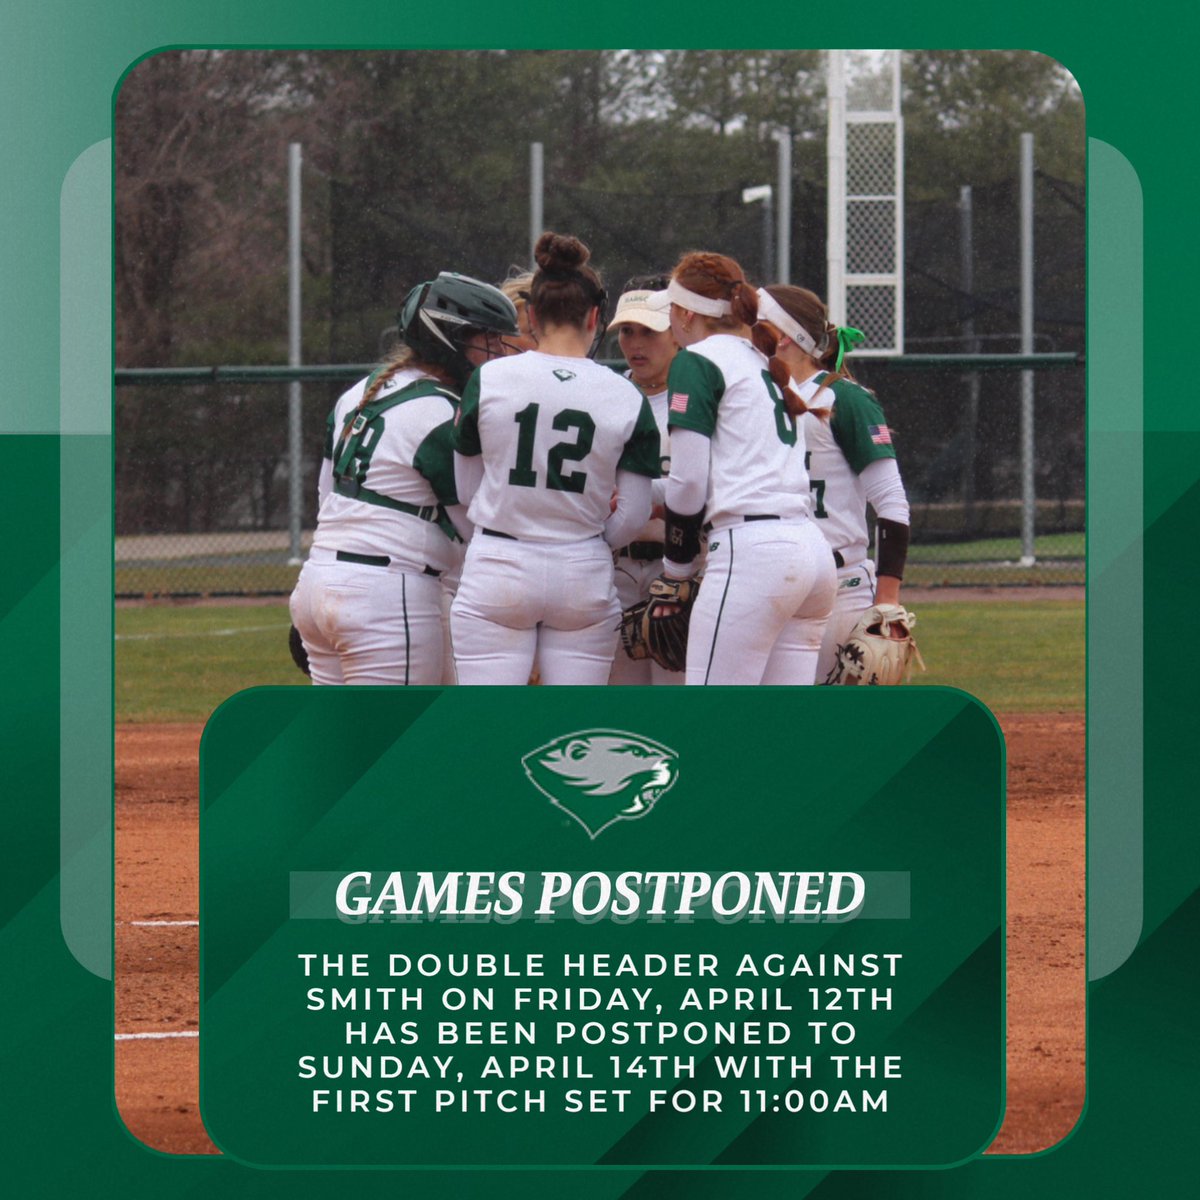 Due to inclement weather, tomorrows upcoming games against Smith have been postponed to Sunday🌧️🌧️ 

#GoBabo #StrictlyBusiness #EveryDamDay